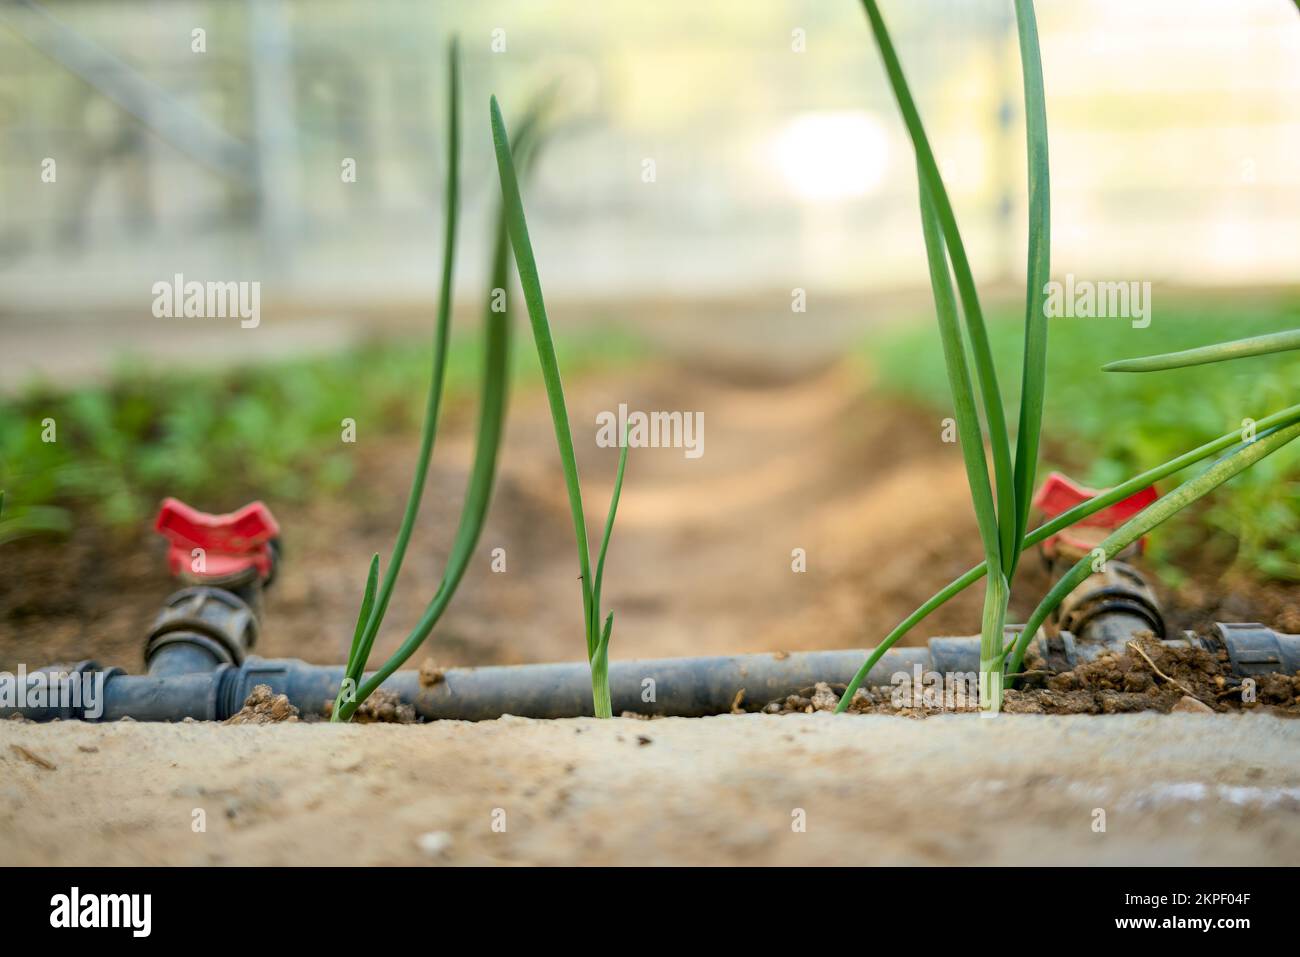 Homegrown onion plants grown in a home greenhouse biological methods. Installed automated drip irrigation system. Home gardening. Greece. Stock Photo